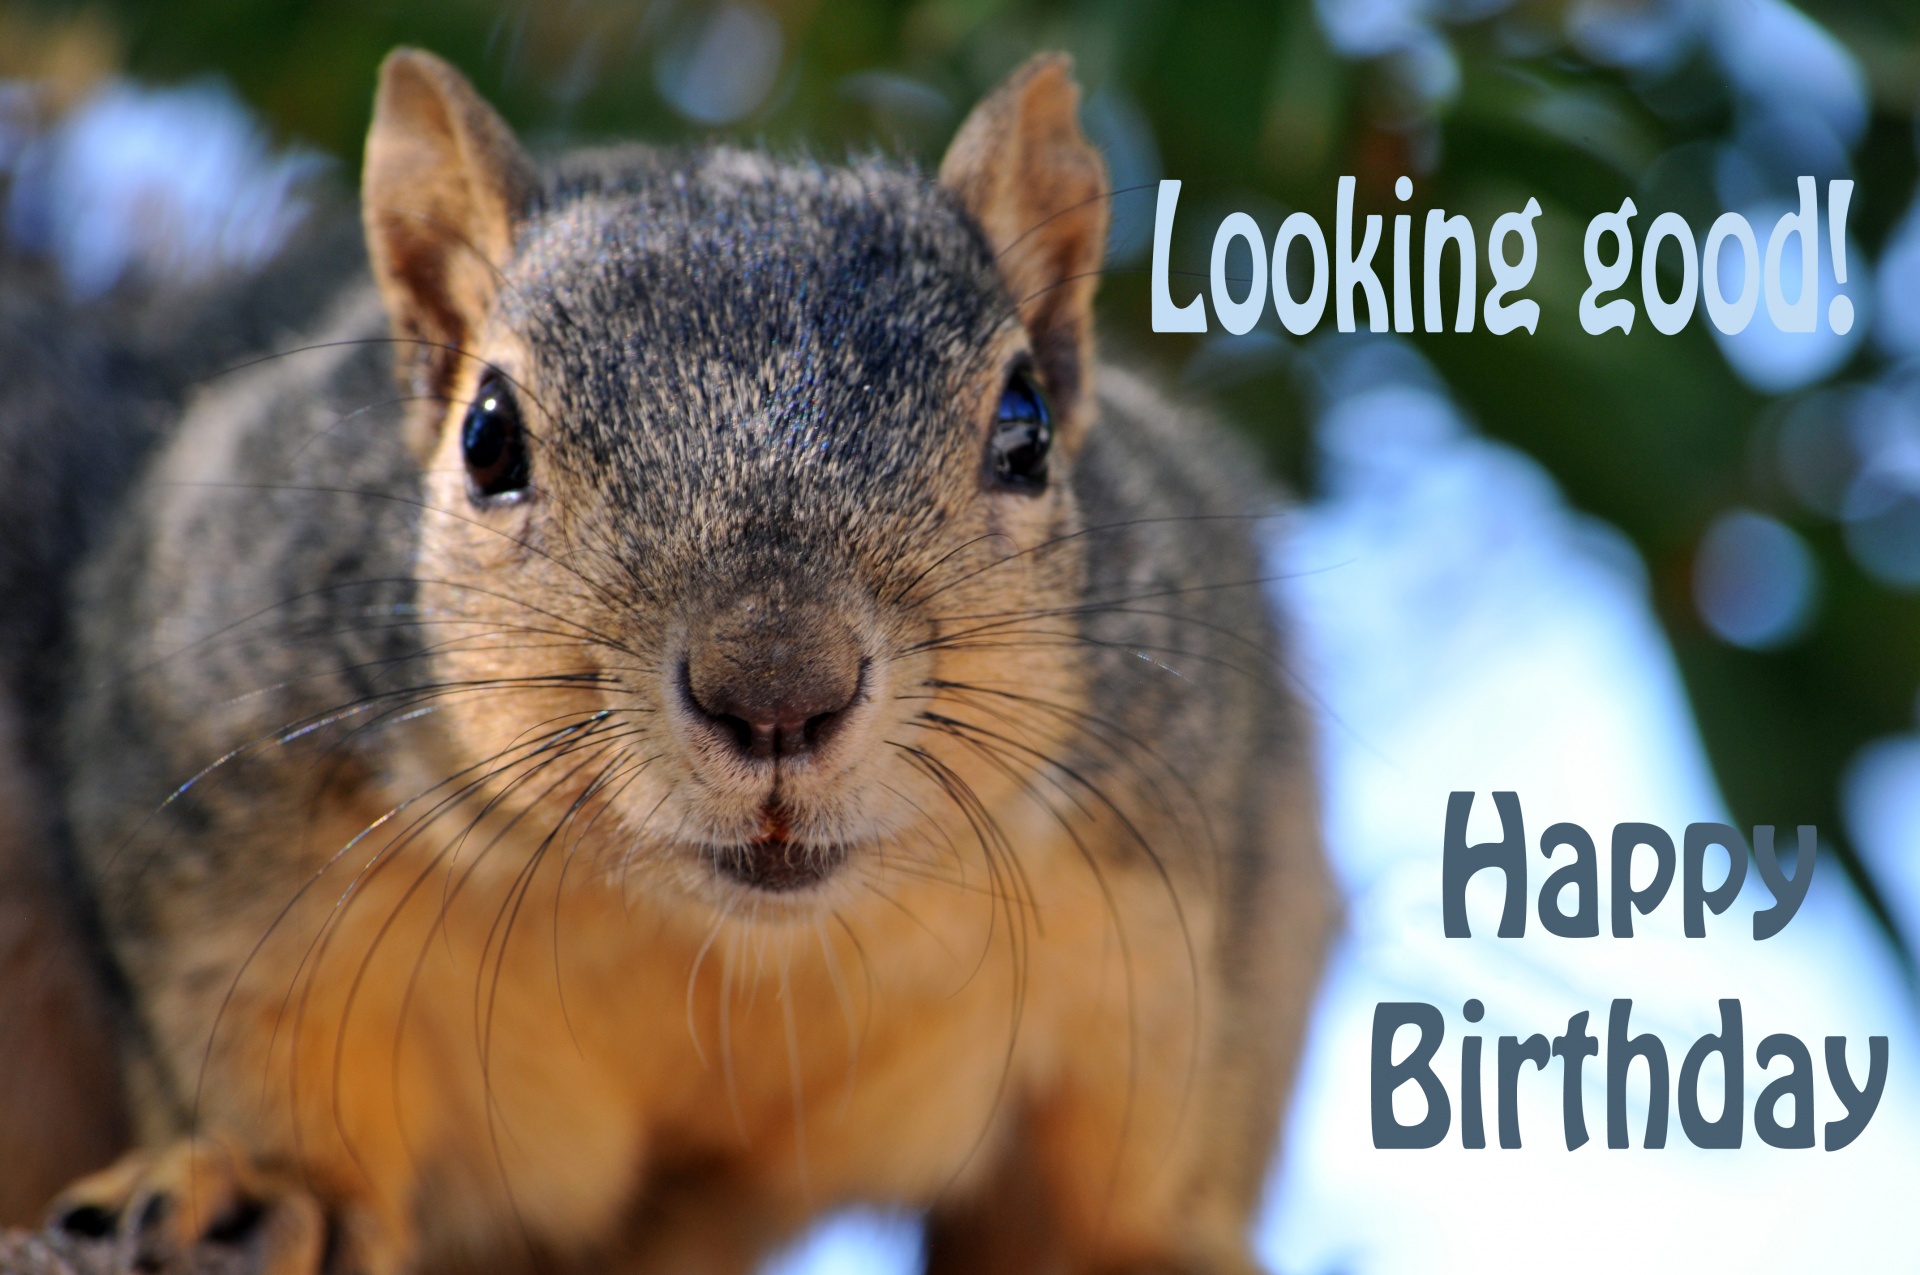 close-up of a curious squirrel with wording &quot;Looking Good - Happy Birthday&quot;